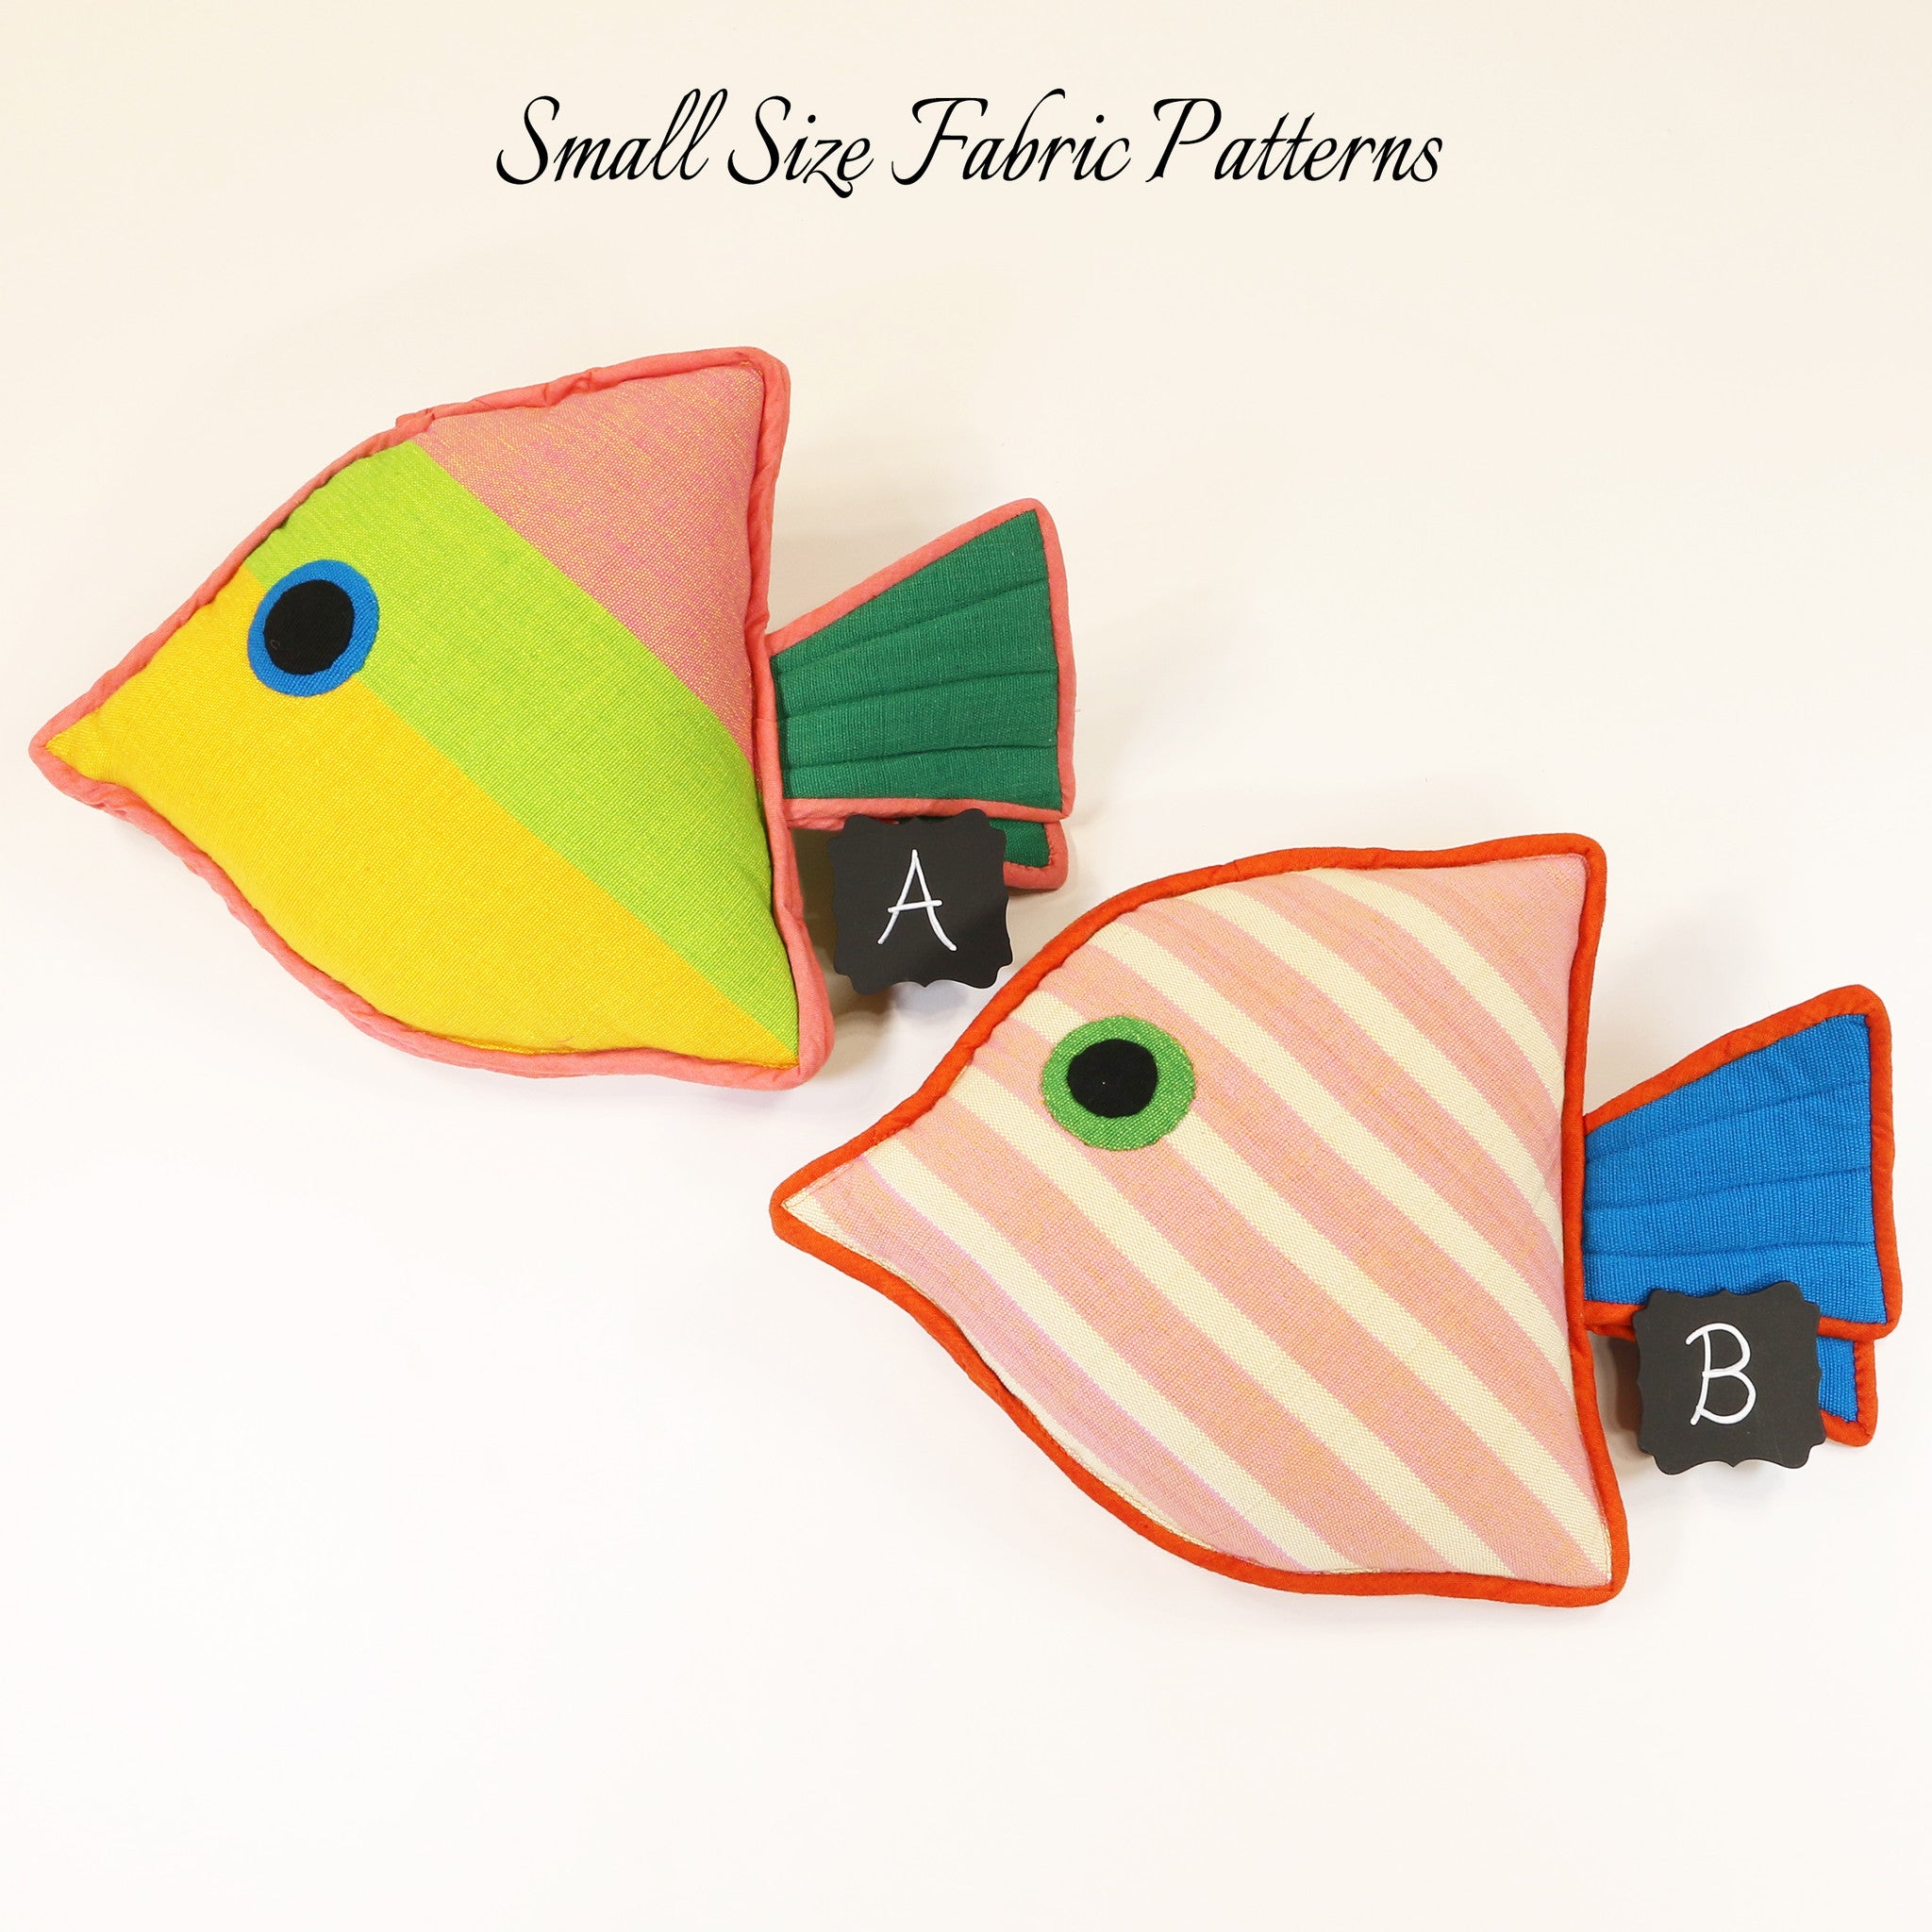 Misty, the Juvenile Fish – all small size fabric patterns shown